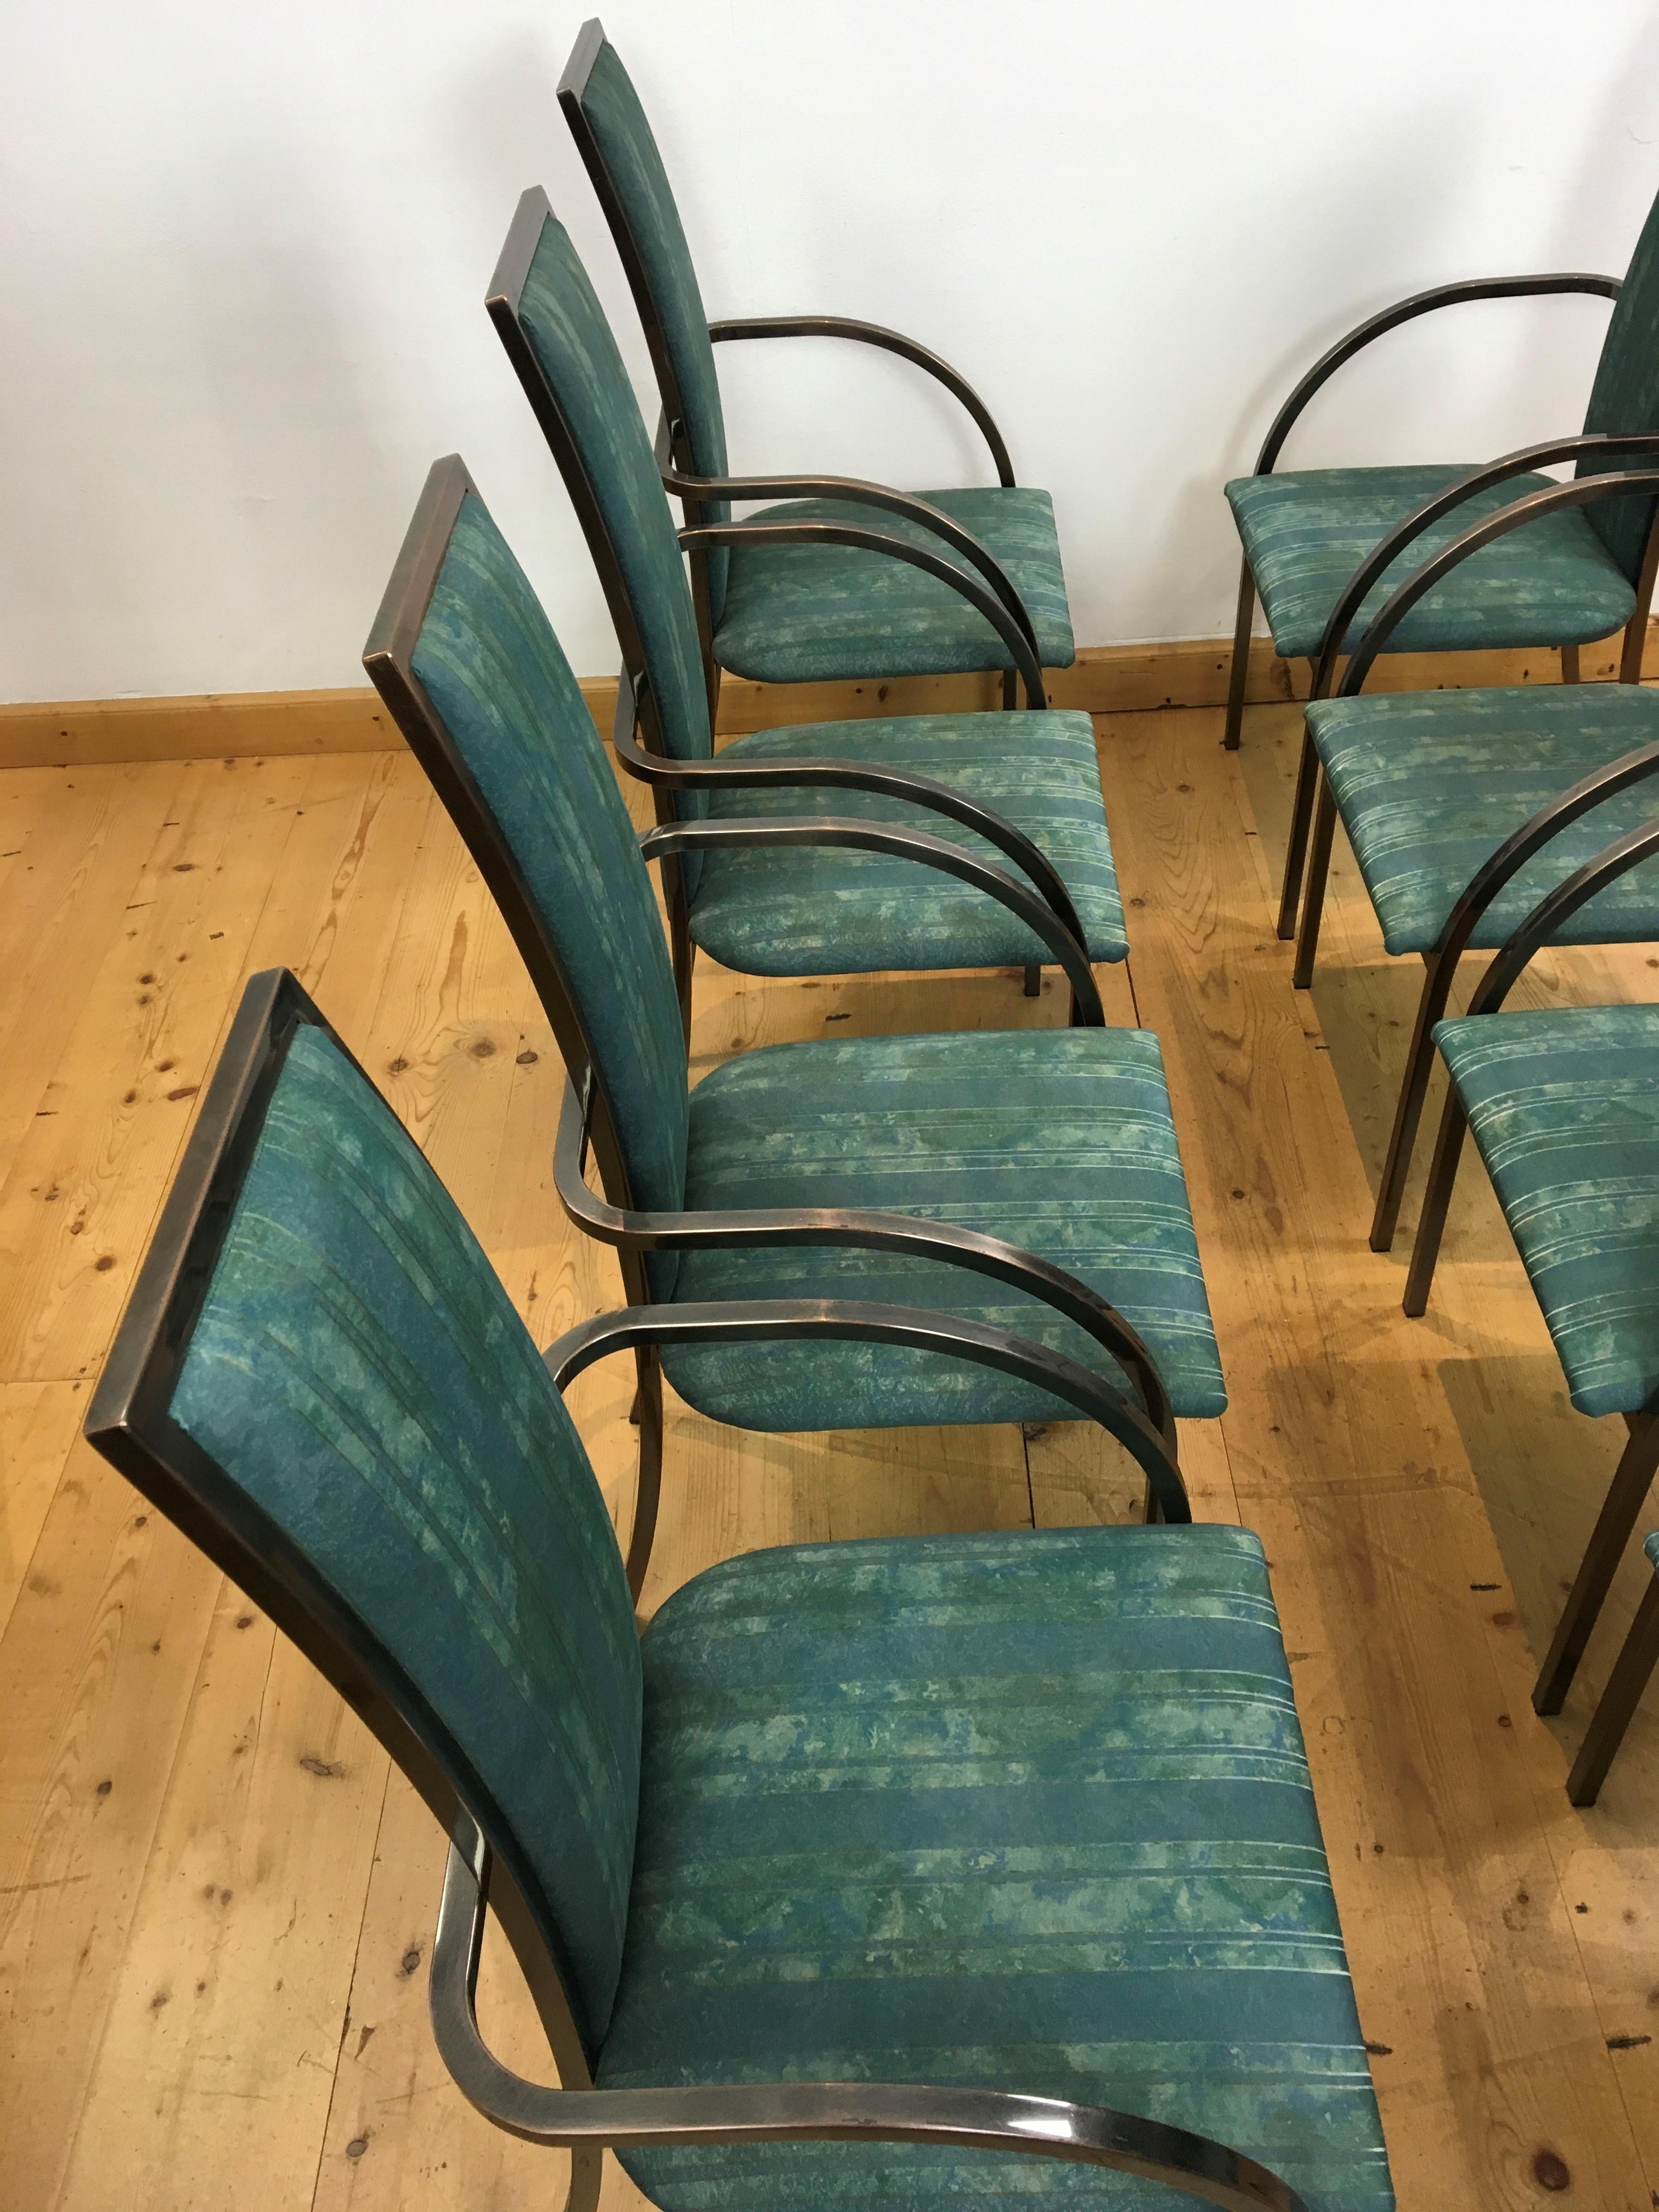 Set of 8 Belgochrom - 8 green Belgo Chrome dining room chairs. 
Armchairs with bronzed patinated metal brass frame
and green -blue original upholstery. The green -blue fabric upholstery has a mixed pattern of colors and stripes. 

This original